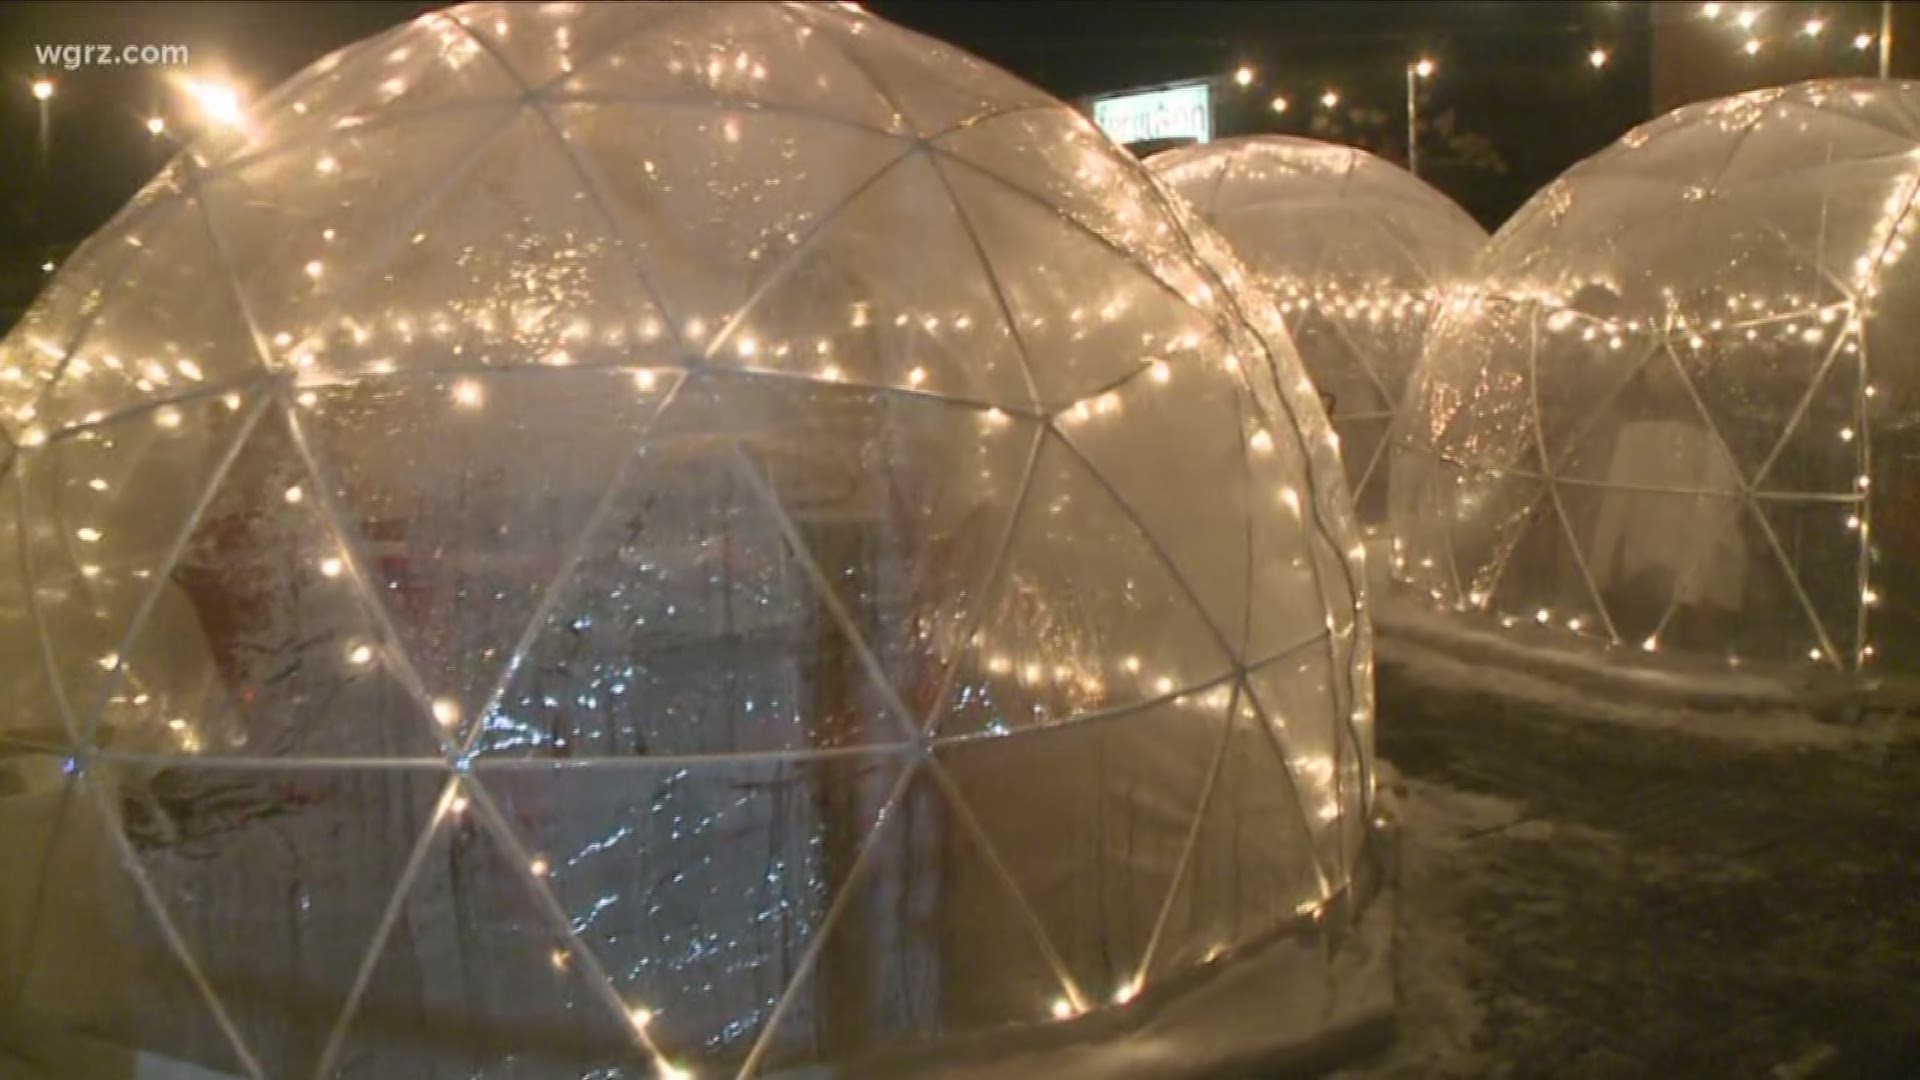 Tappo unveils new igloo dining